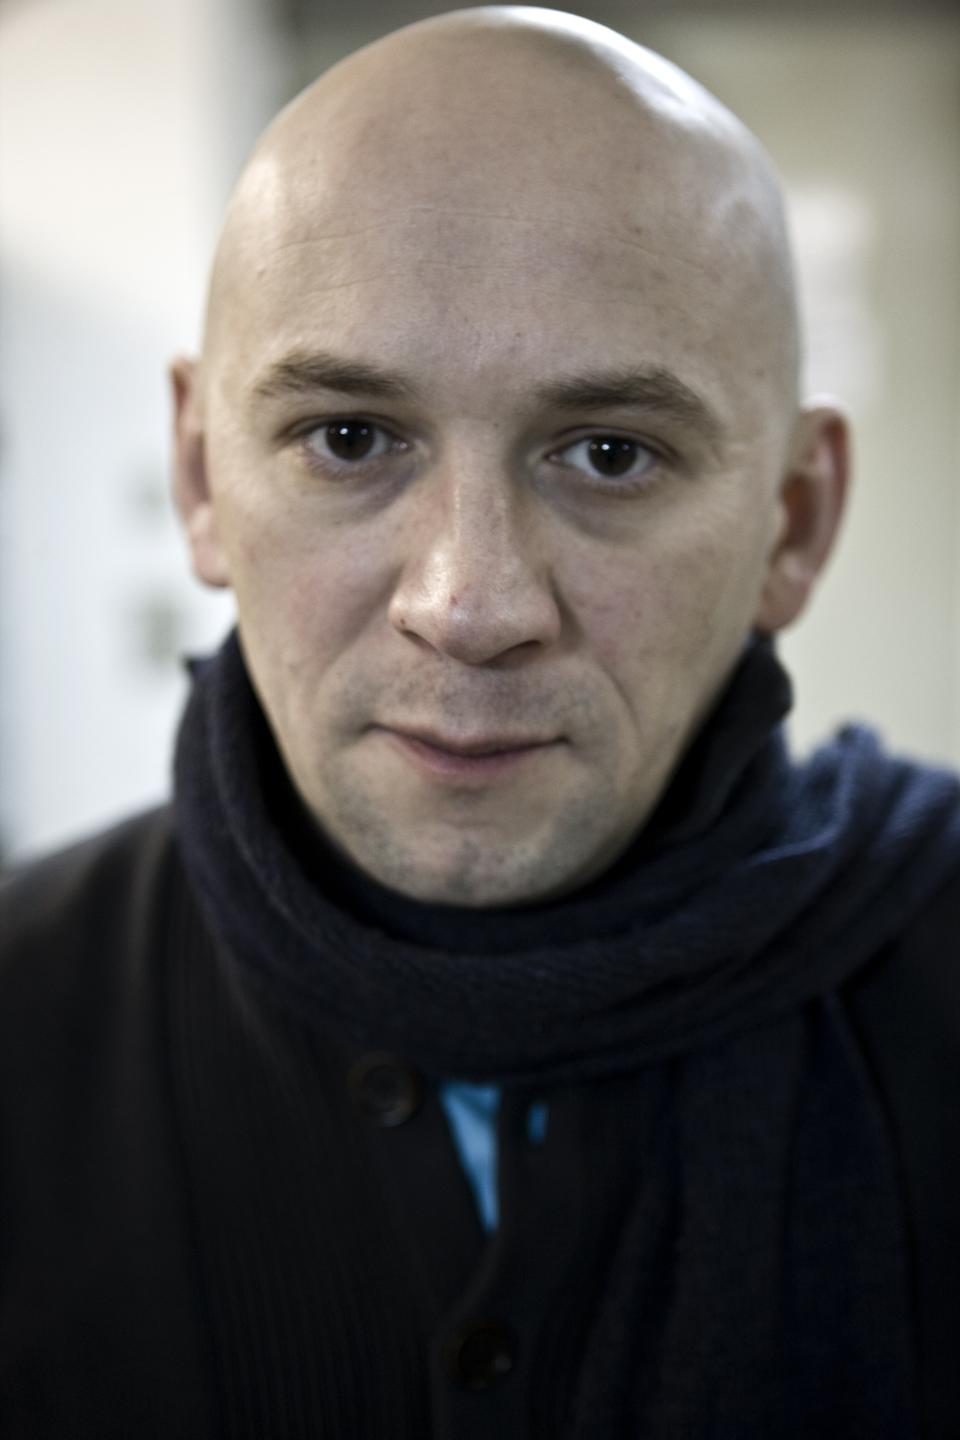 In this photo taken on Tuesday, Jan. 18, 2011, Russian documentary filmmaker Alexander Rastorguyev poses for a photo in Moscow, Russia . Three Russian journalists were killed in an ambush outside the town of Sibut in Central African Republic, officials in both countries said Tuesday, July 31, 2018. The Russian Foreign Ministry identified the slain journalists as Kirill Radchenko, Alexander Rastorguyev and Orkhan Dzhemal. (AP Photo/Alexei Maishev)